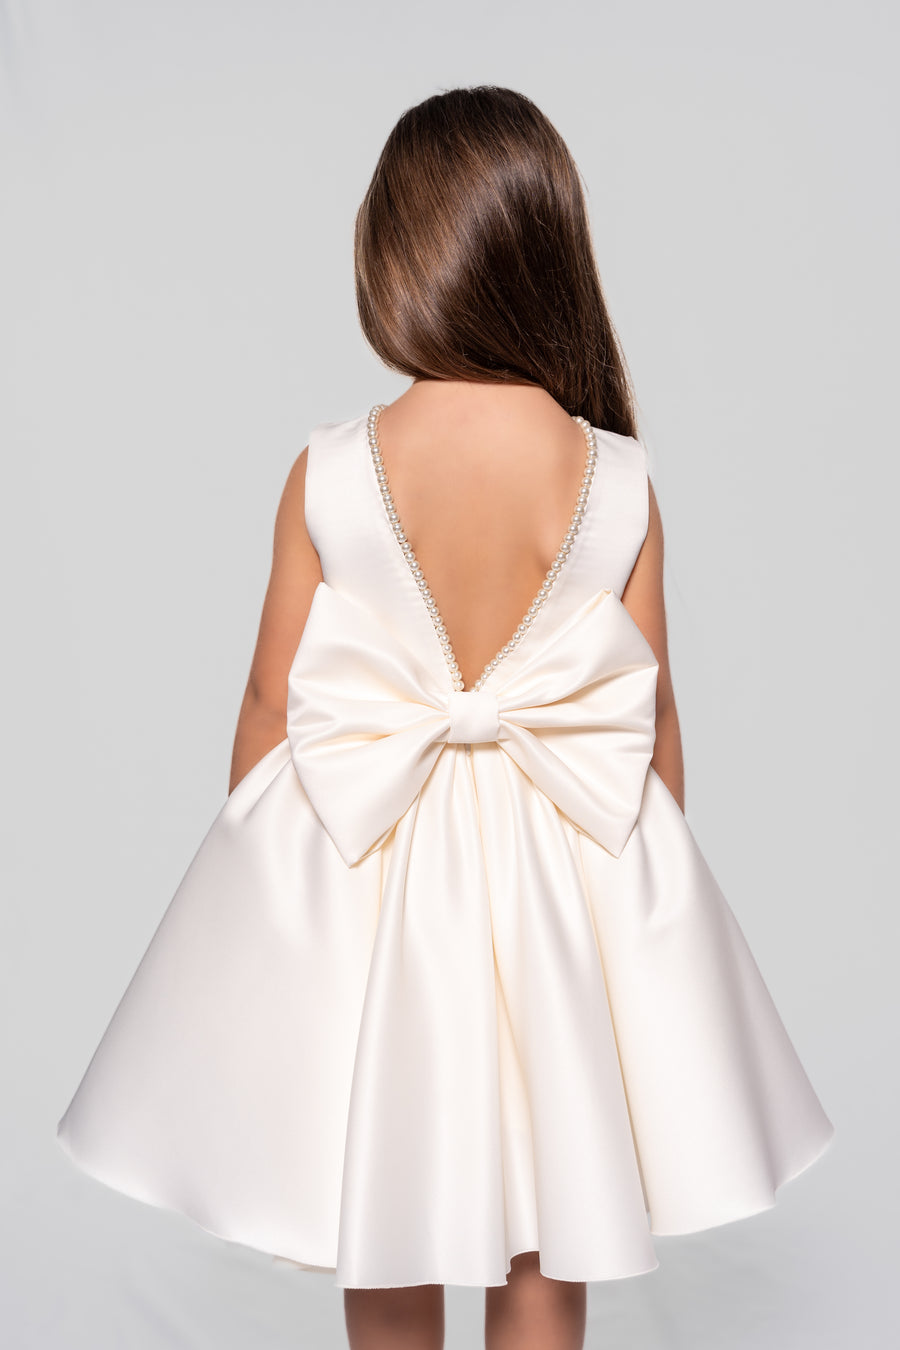 White satin dress embellished with pearls and a ribbon